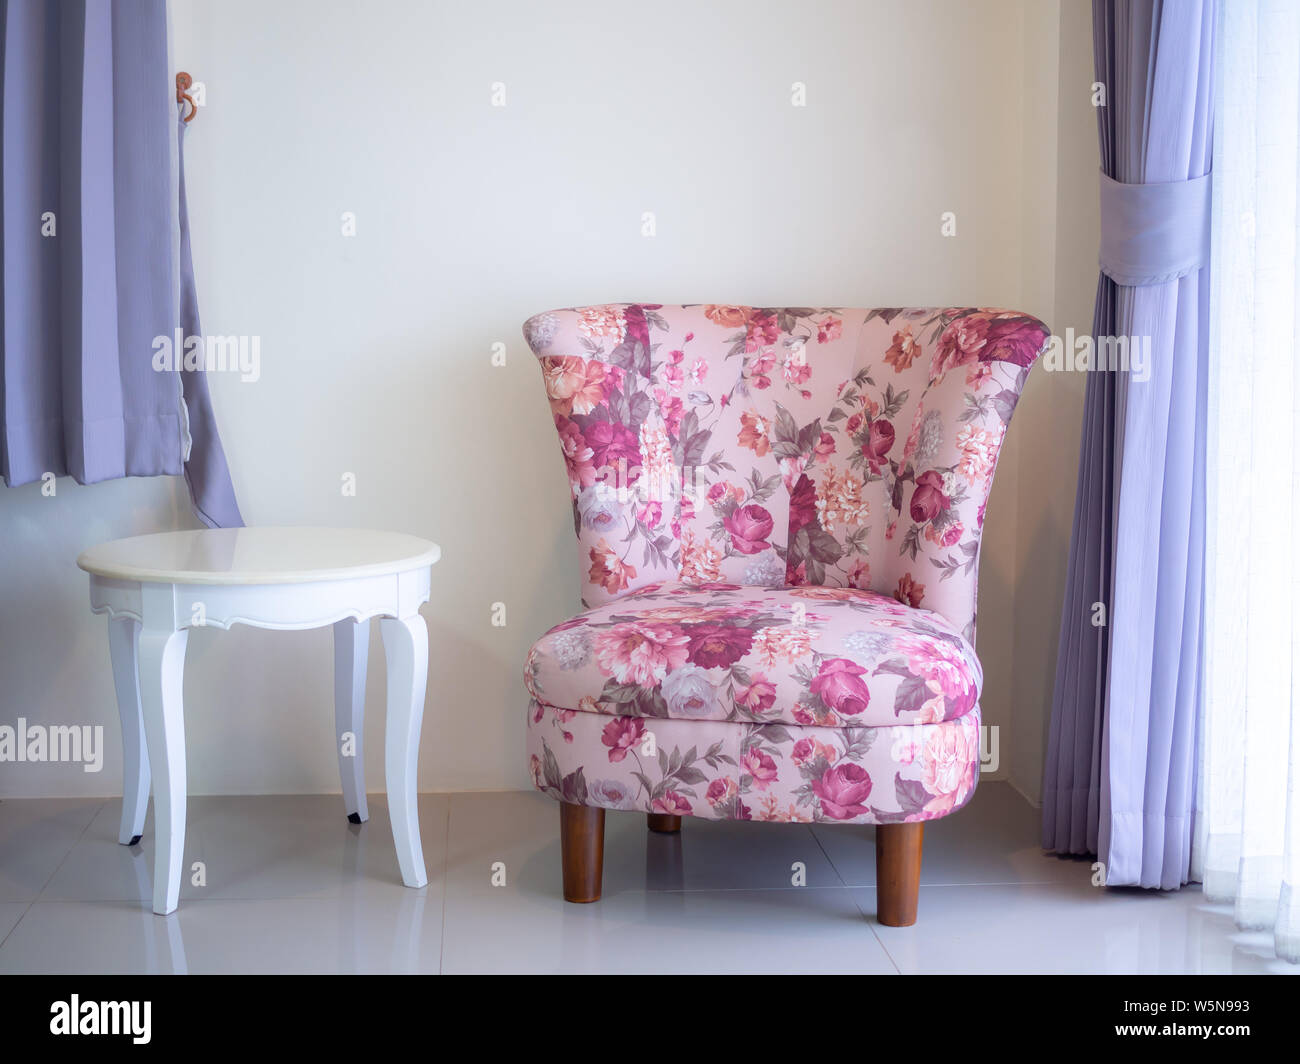 Beautiful pink vintage sofa and white round desk on white wall background near the window. Stock Photo